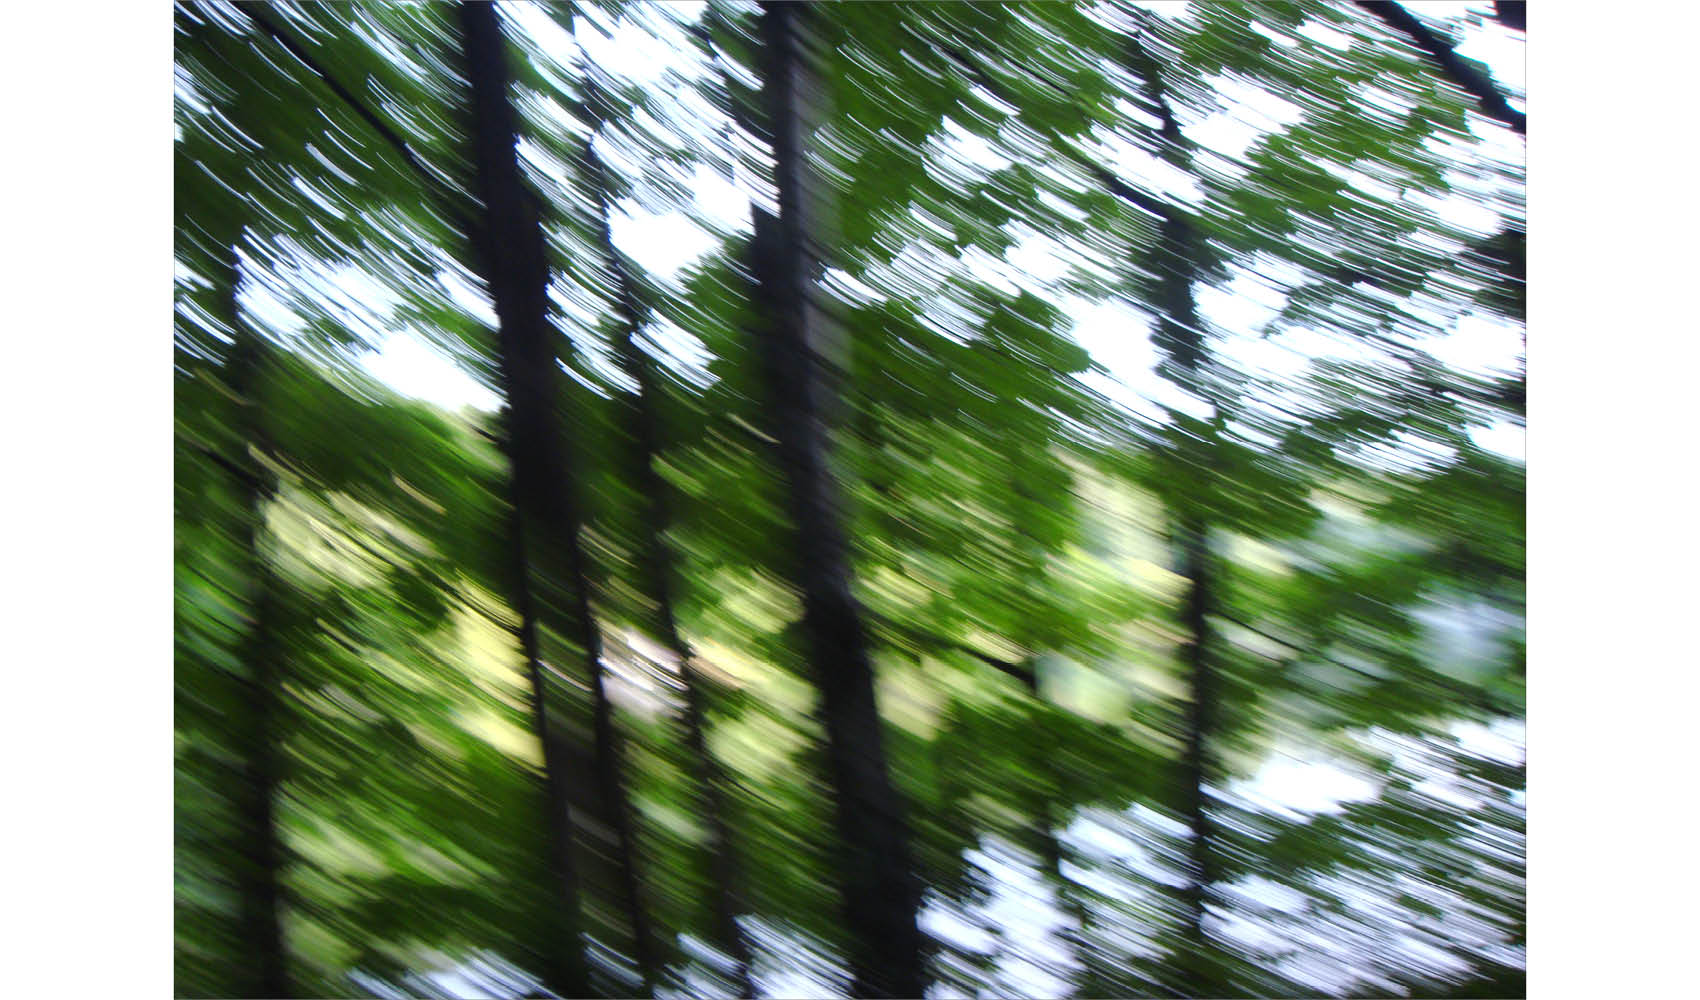 Publications__Russian Forest__6.jpg